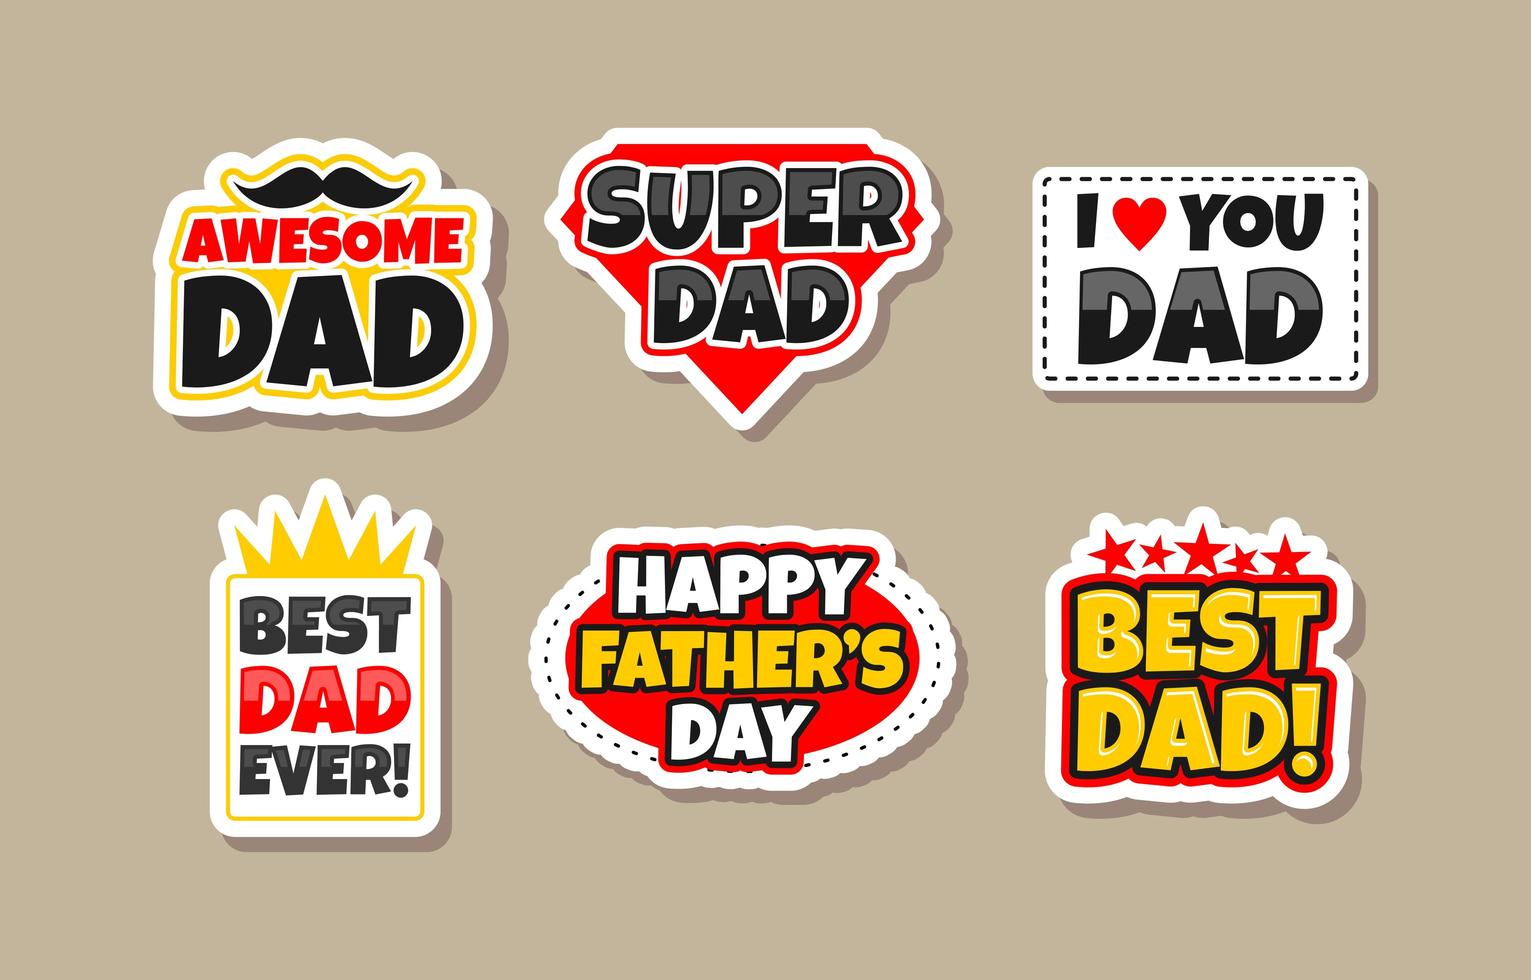 Happy Fathers Day Sticker Set Collection vector